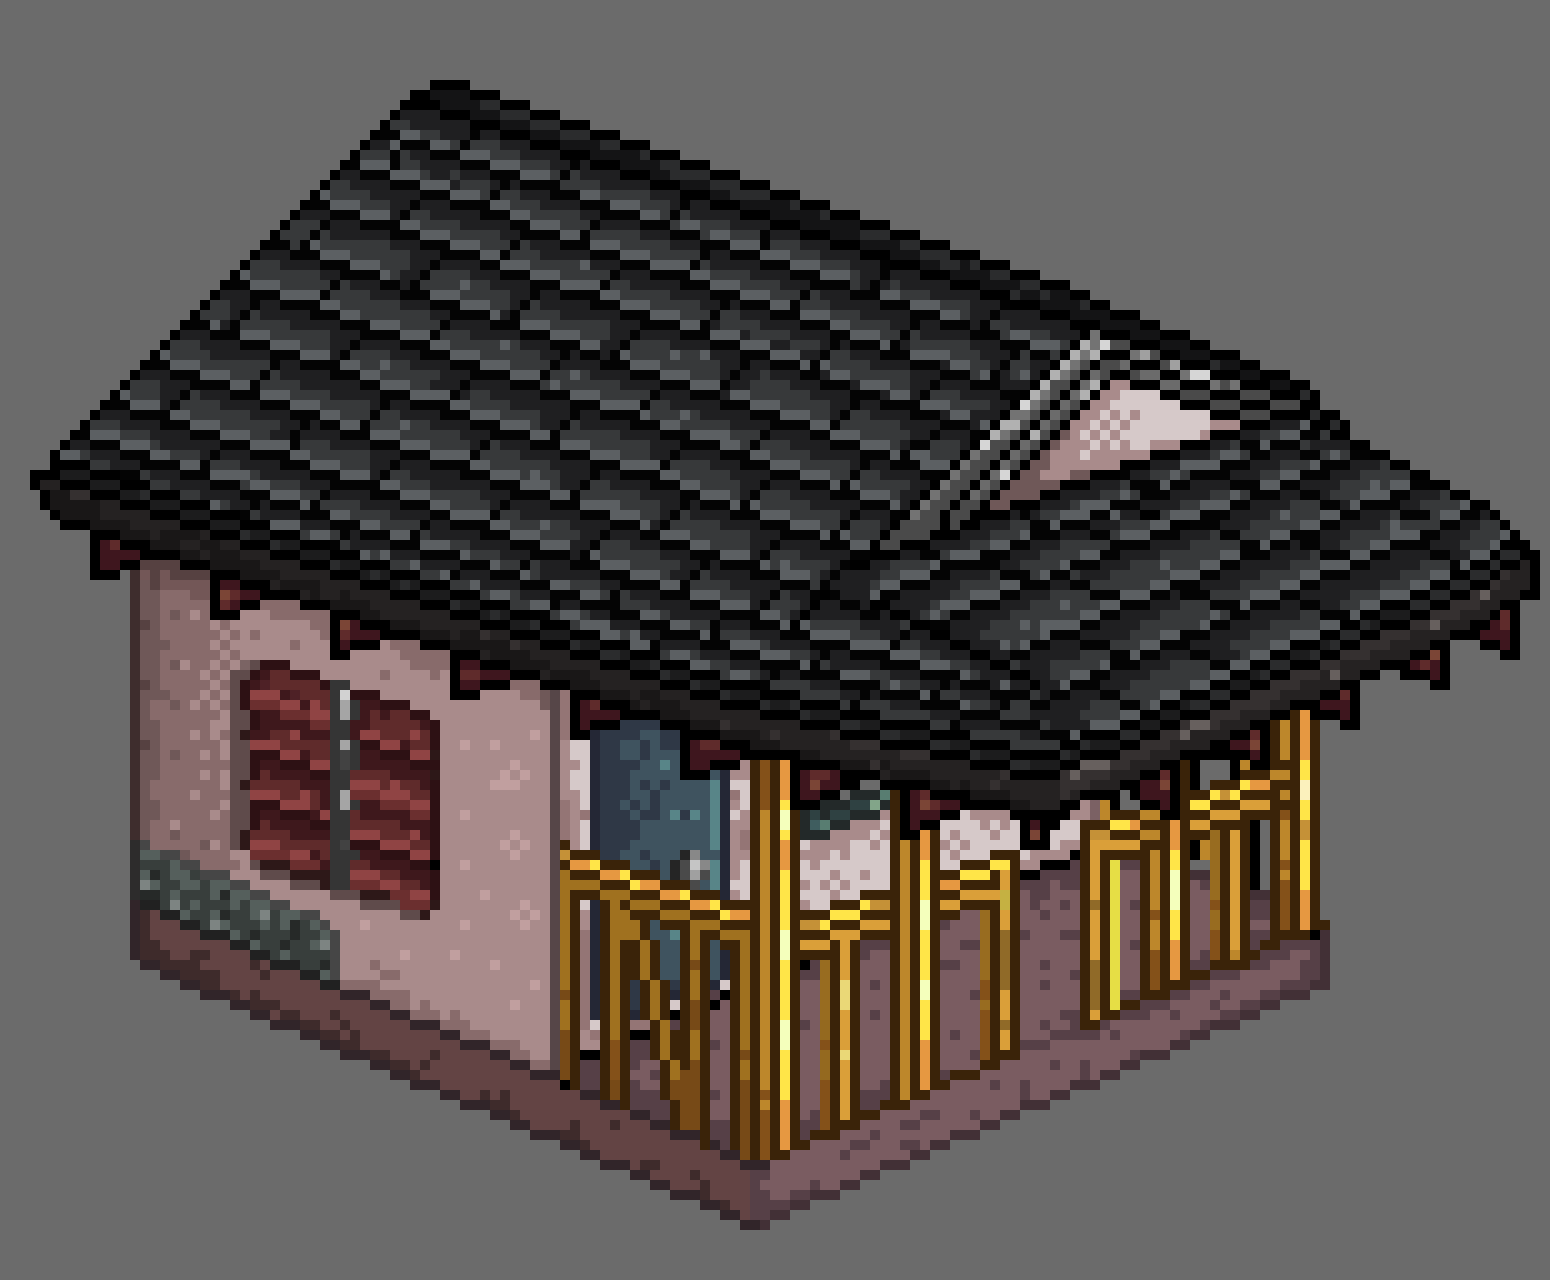 PIXEL HOUSES DONE SO FAR